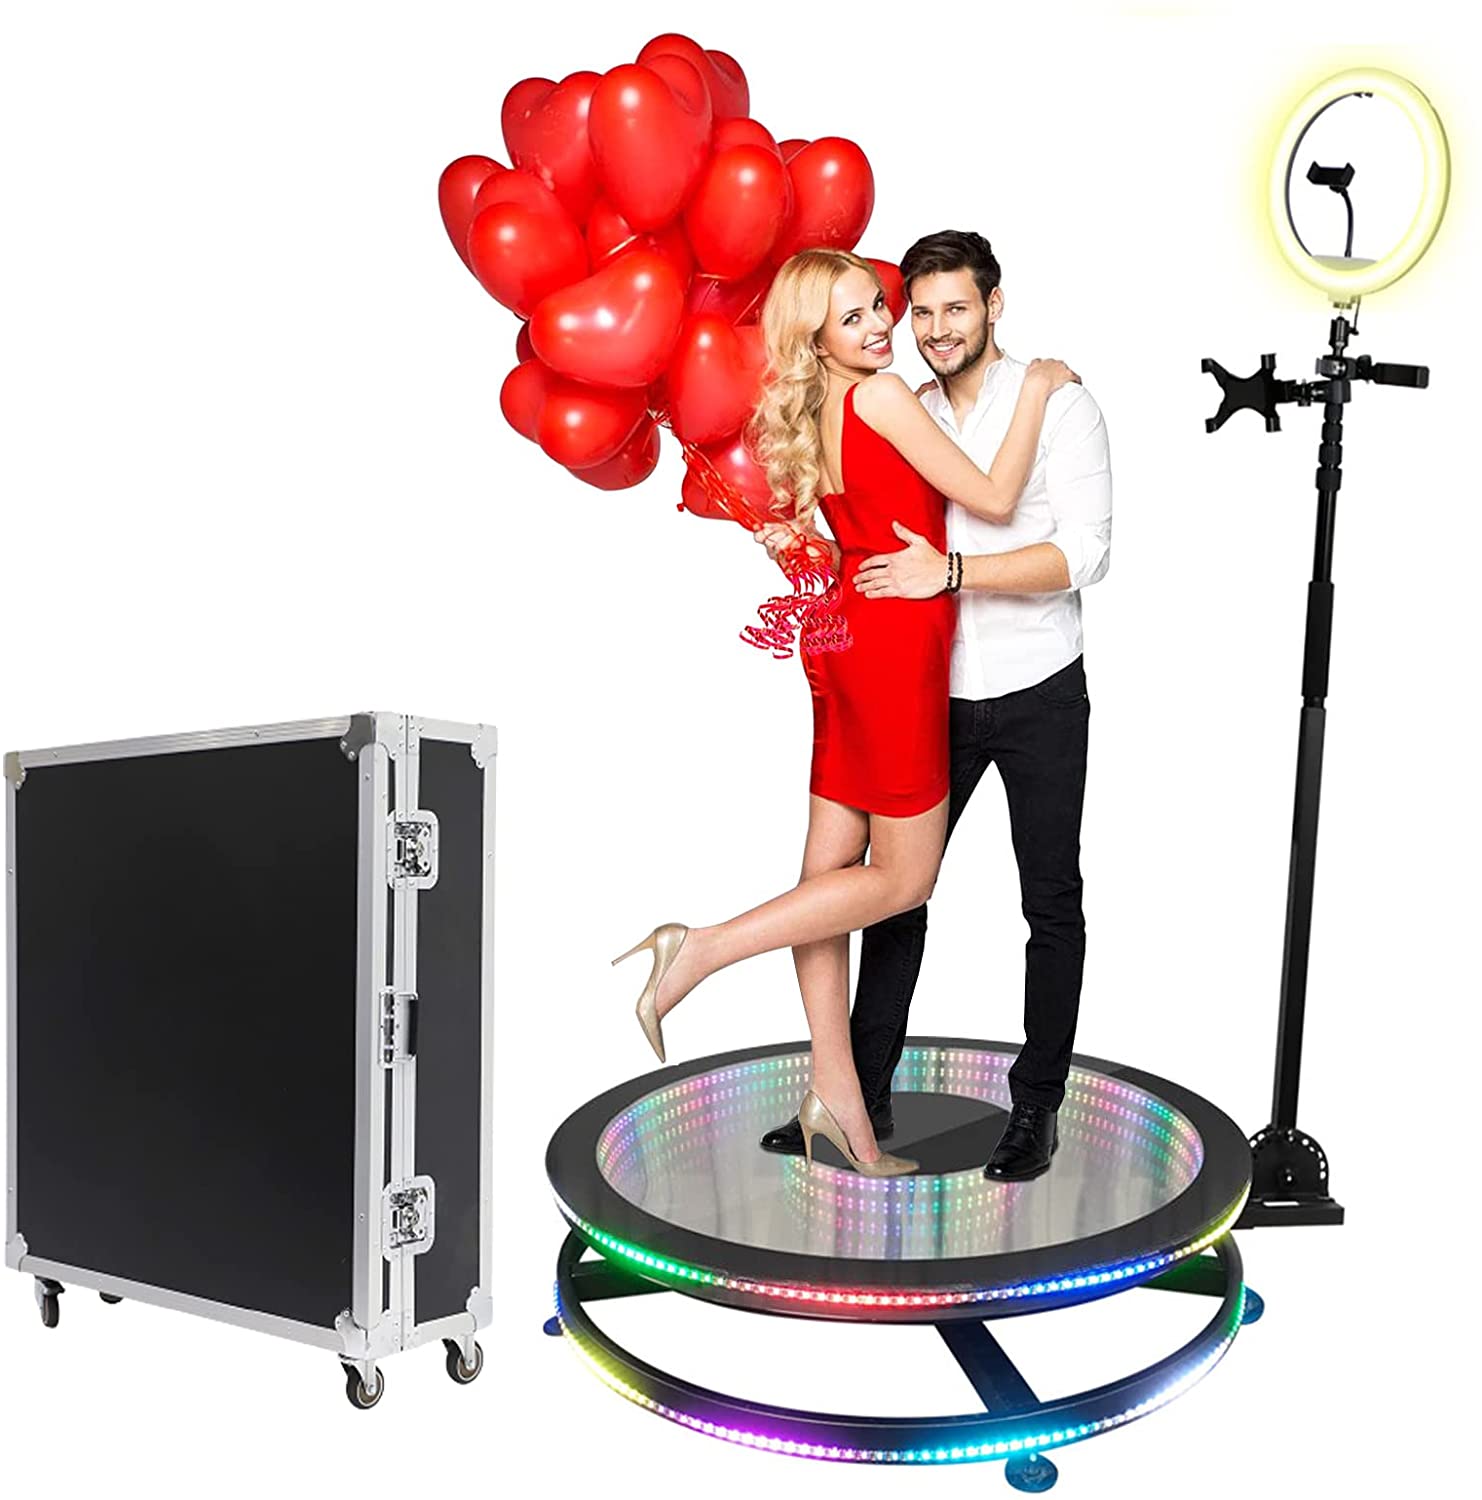 Las Mirrors photo booths for sale, the alternative you need to create your own business